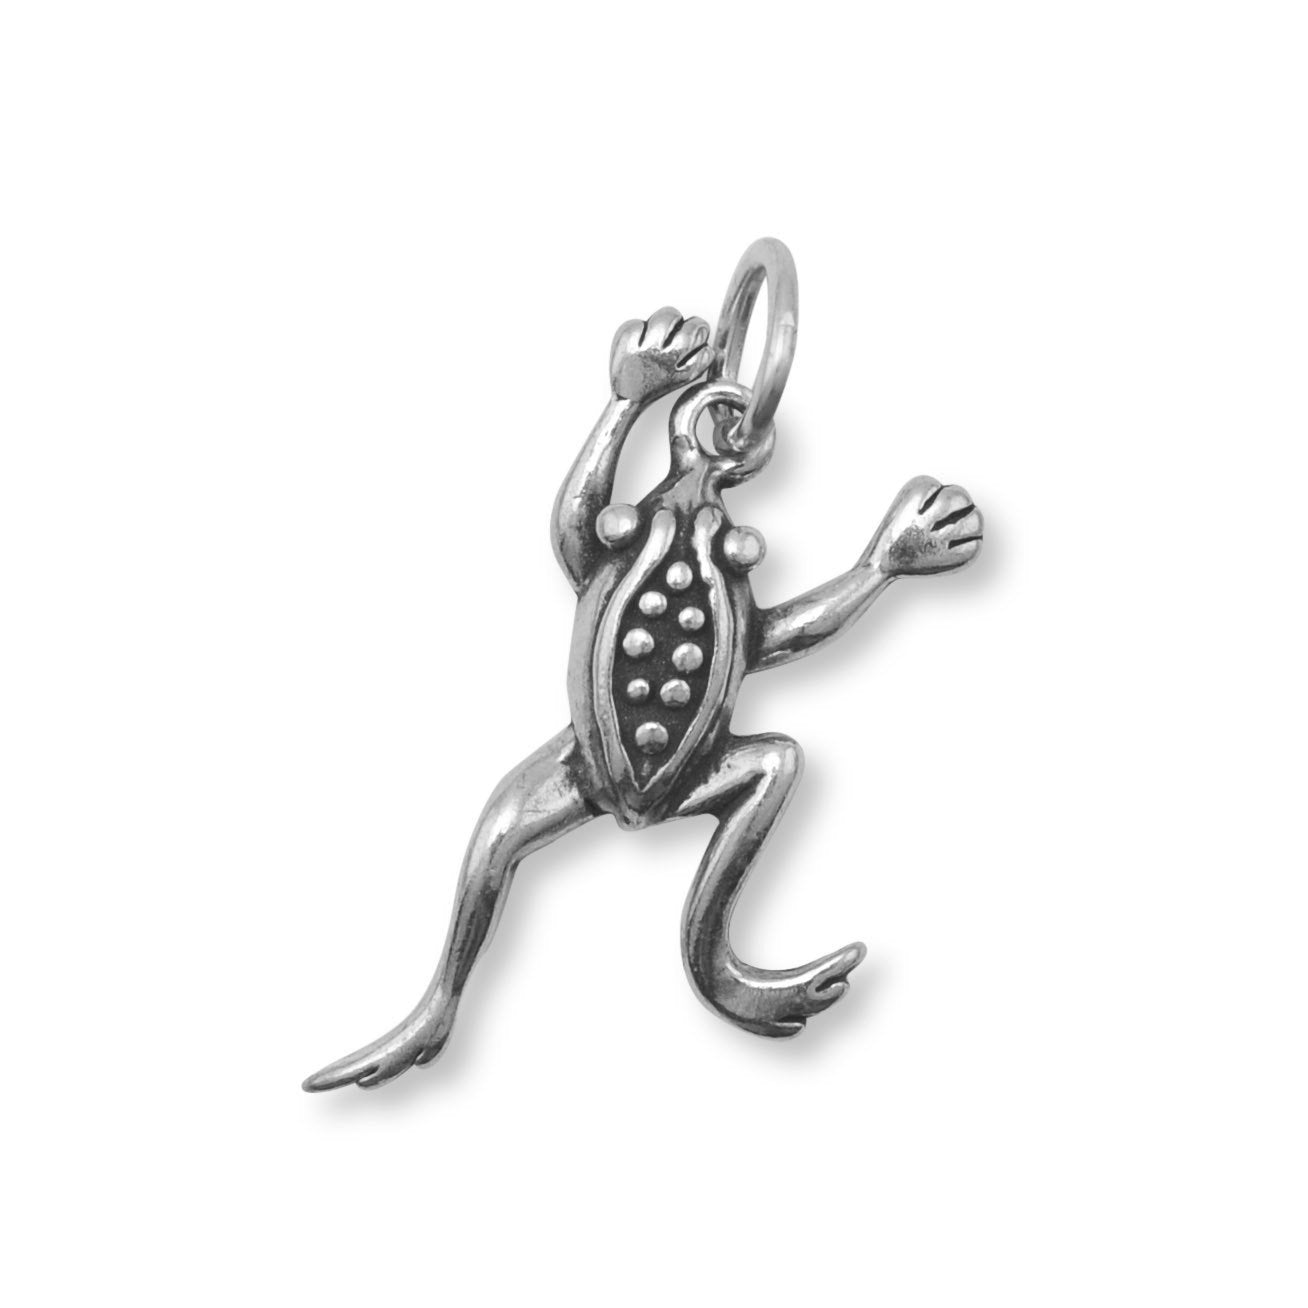 Oxidized Leaping Frog Charm